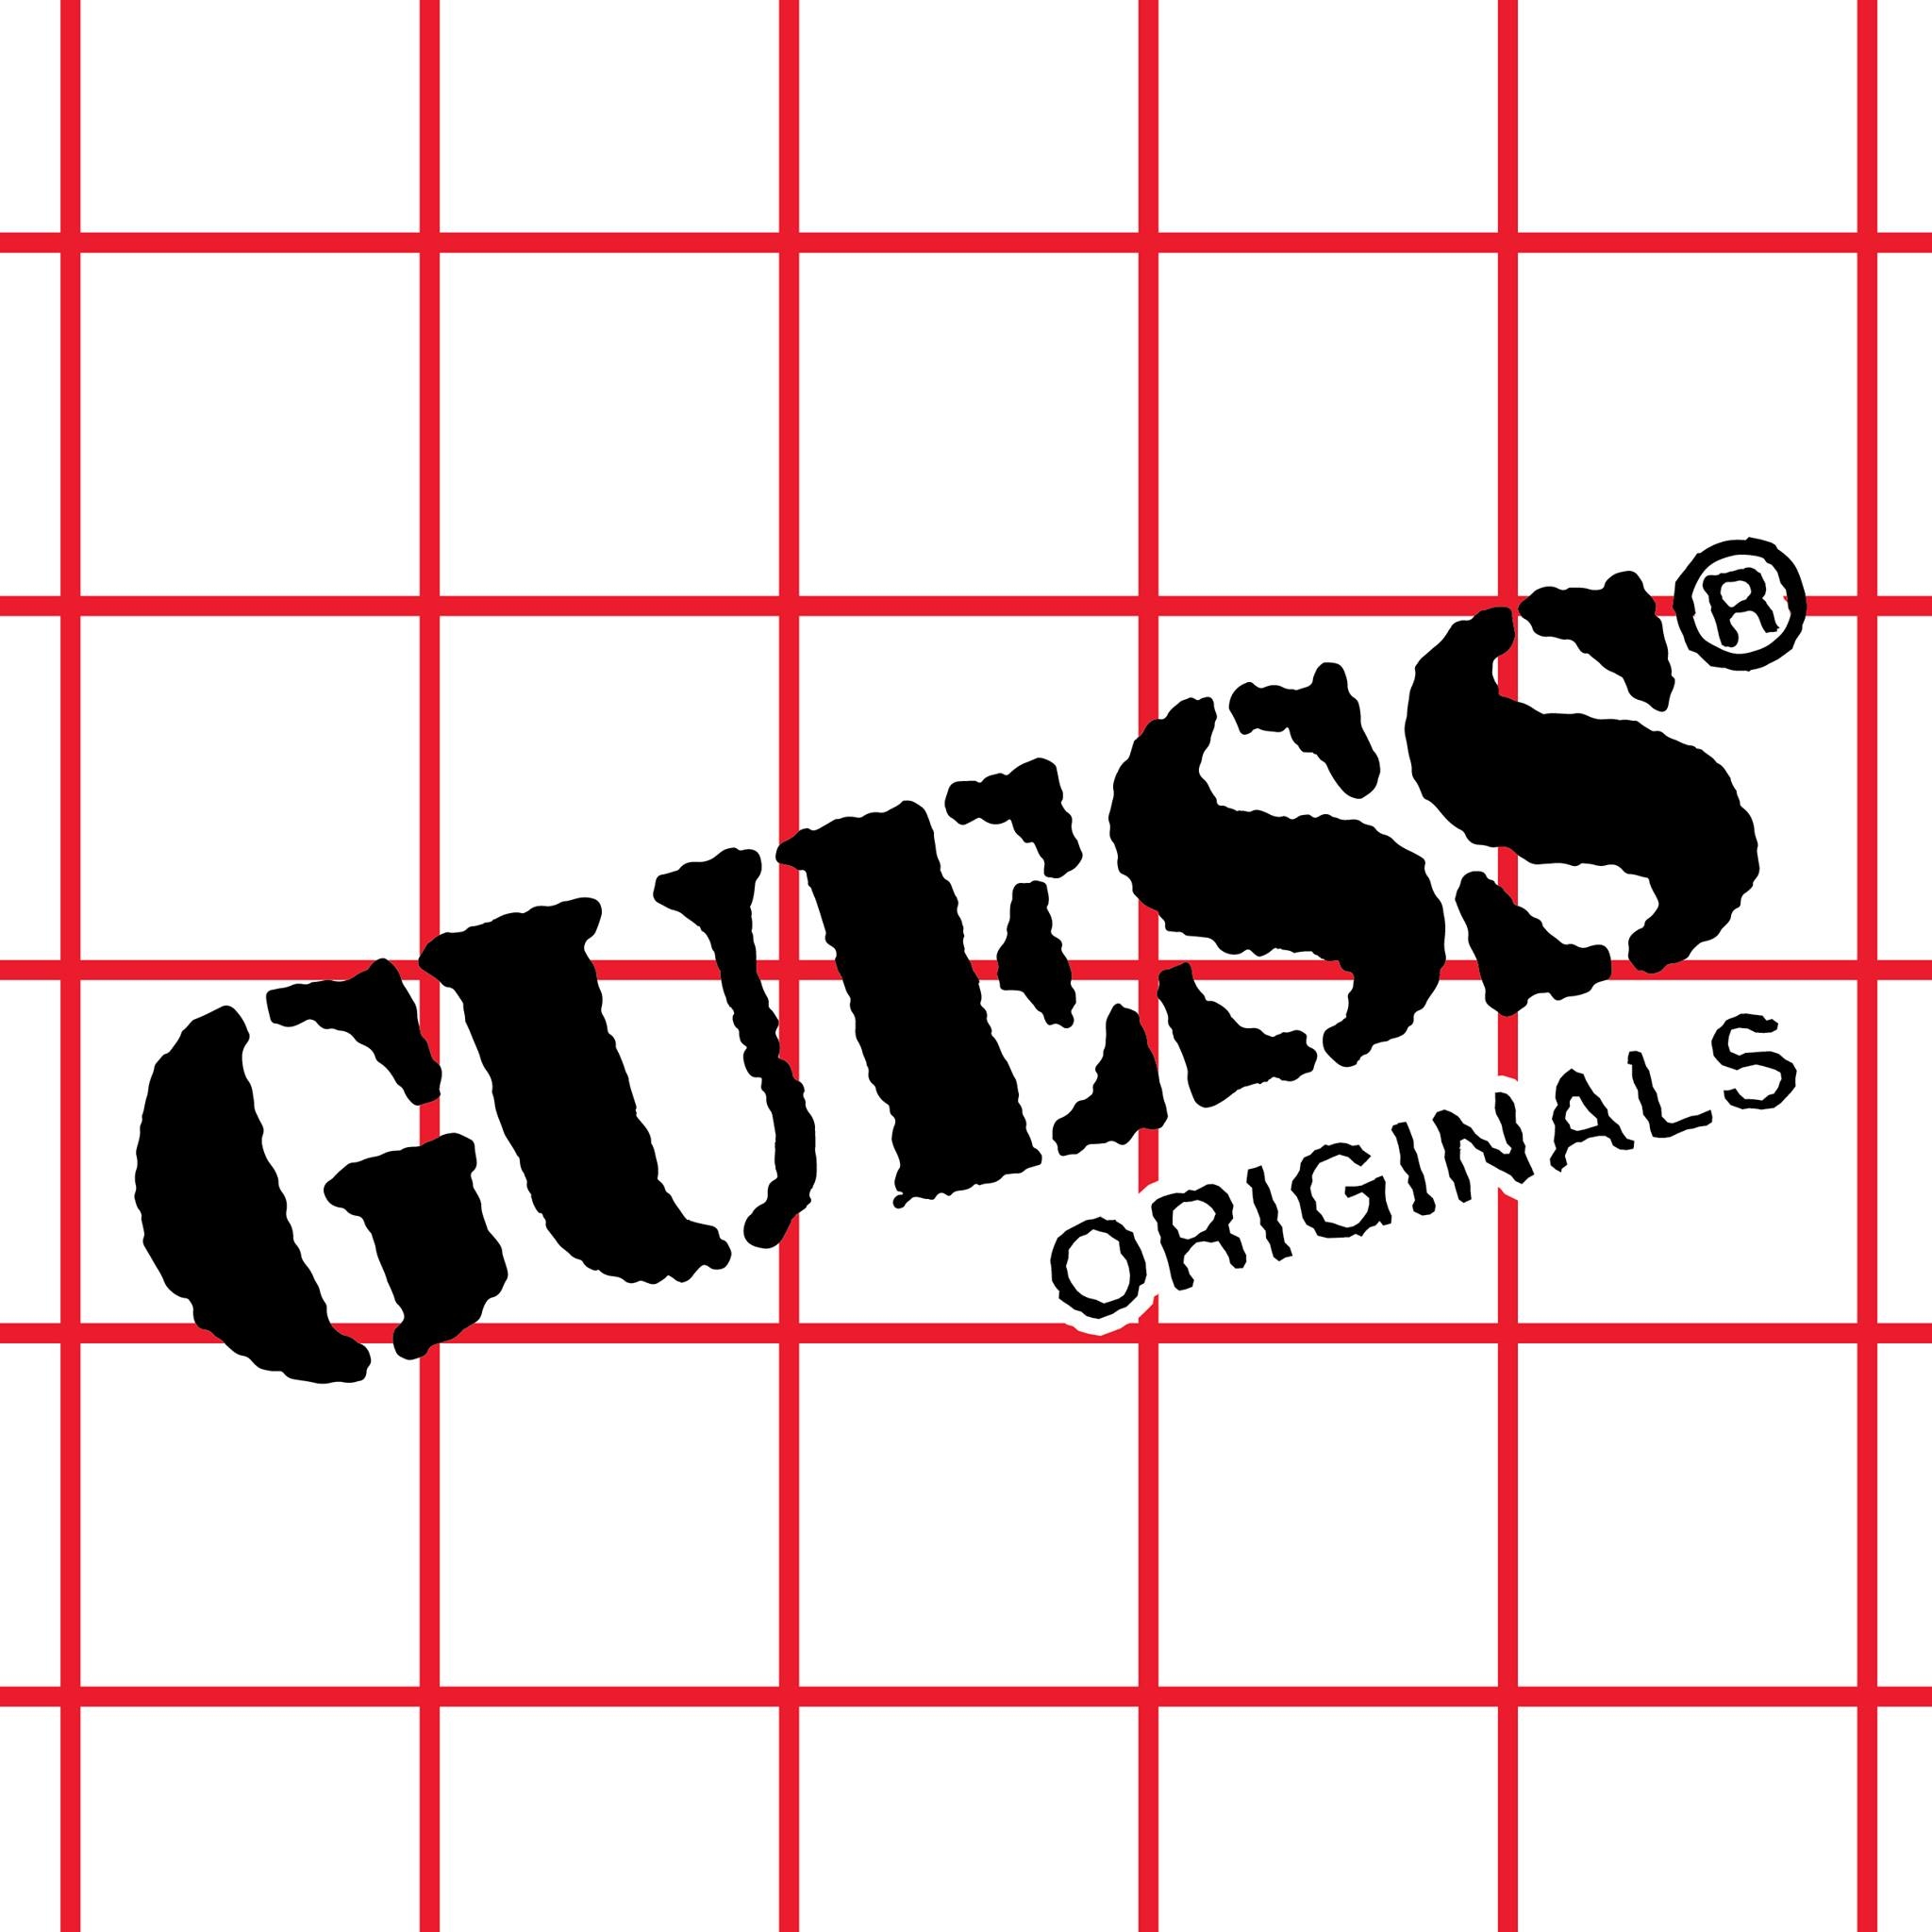 G by GUESS